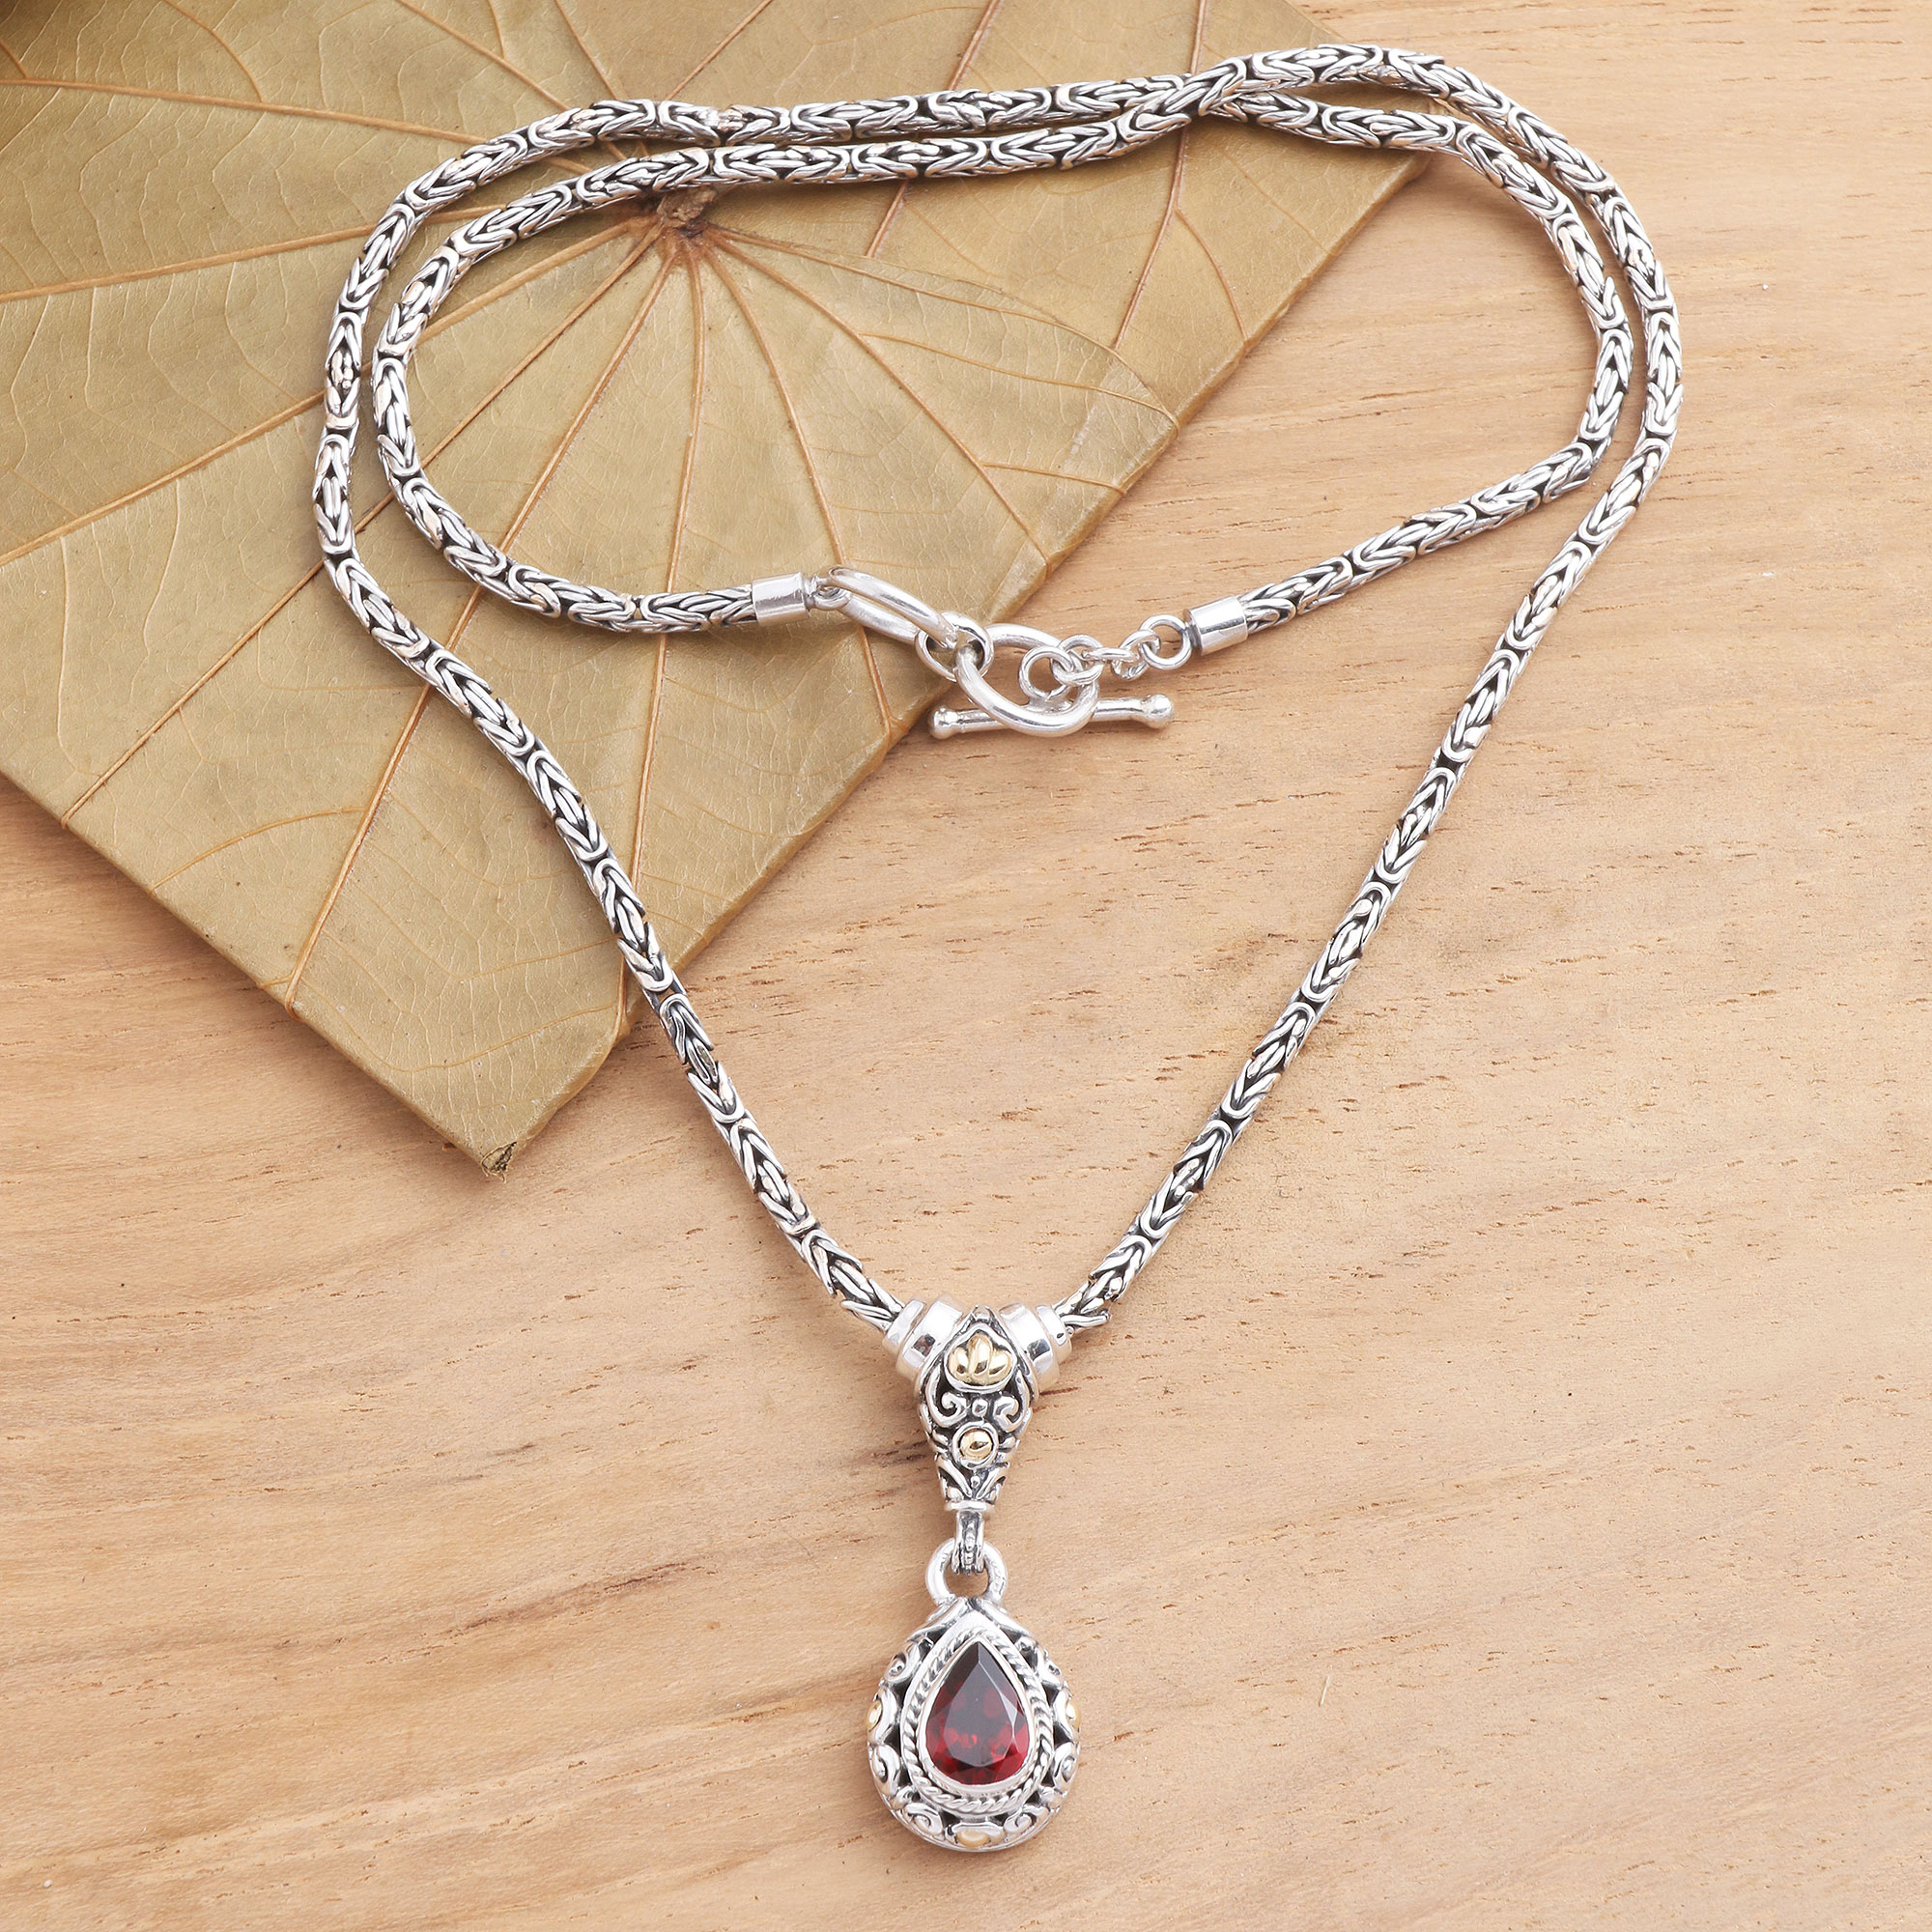 Garnet Pendant and Sterling Silver Necklace